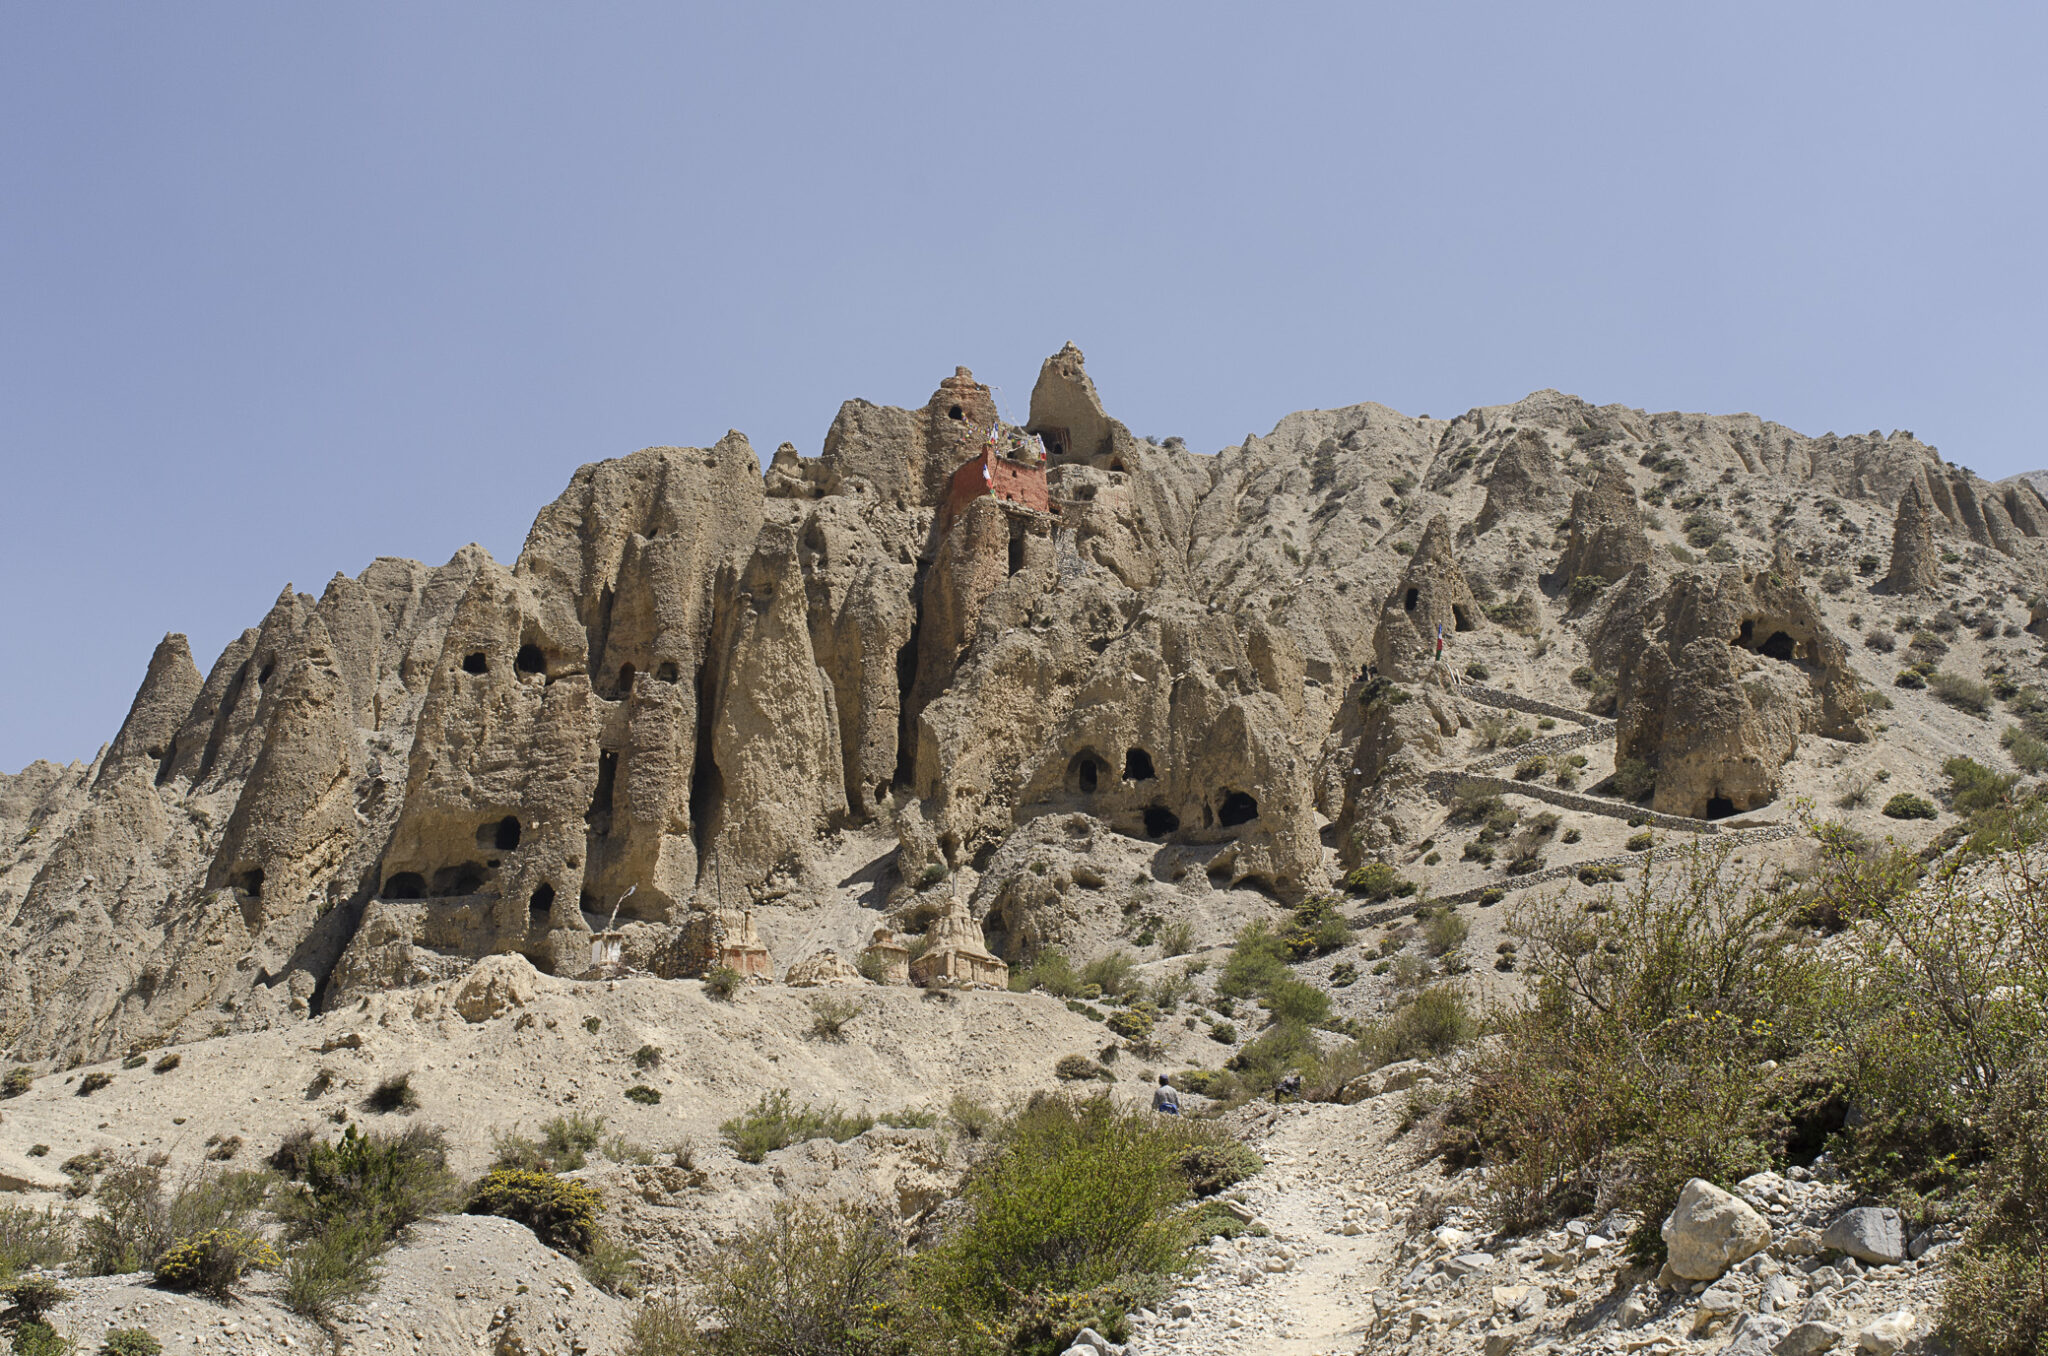 Wide view of rocky mountainside featuring smokestack-like formations and small caves dug into wall